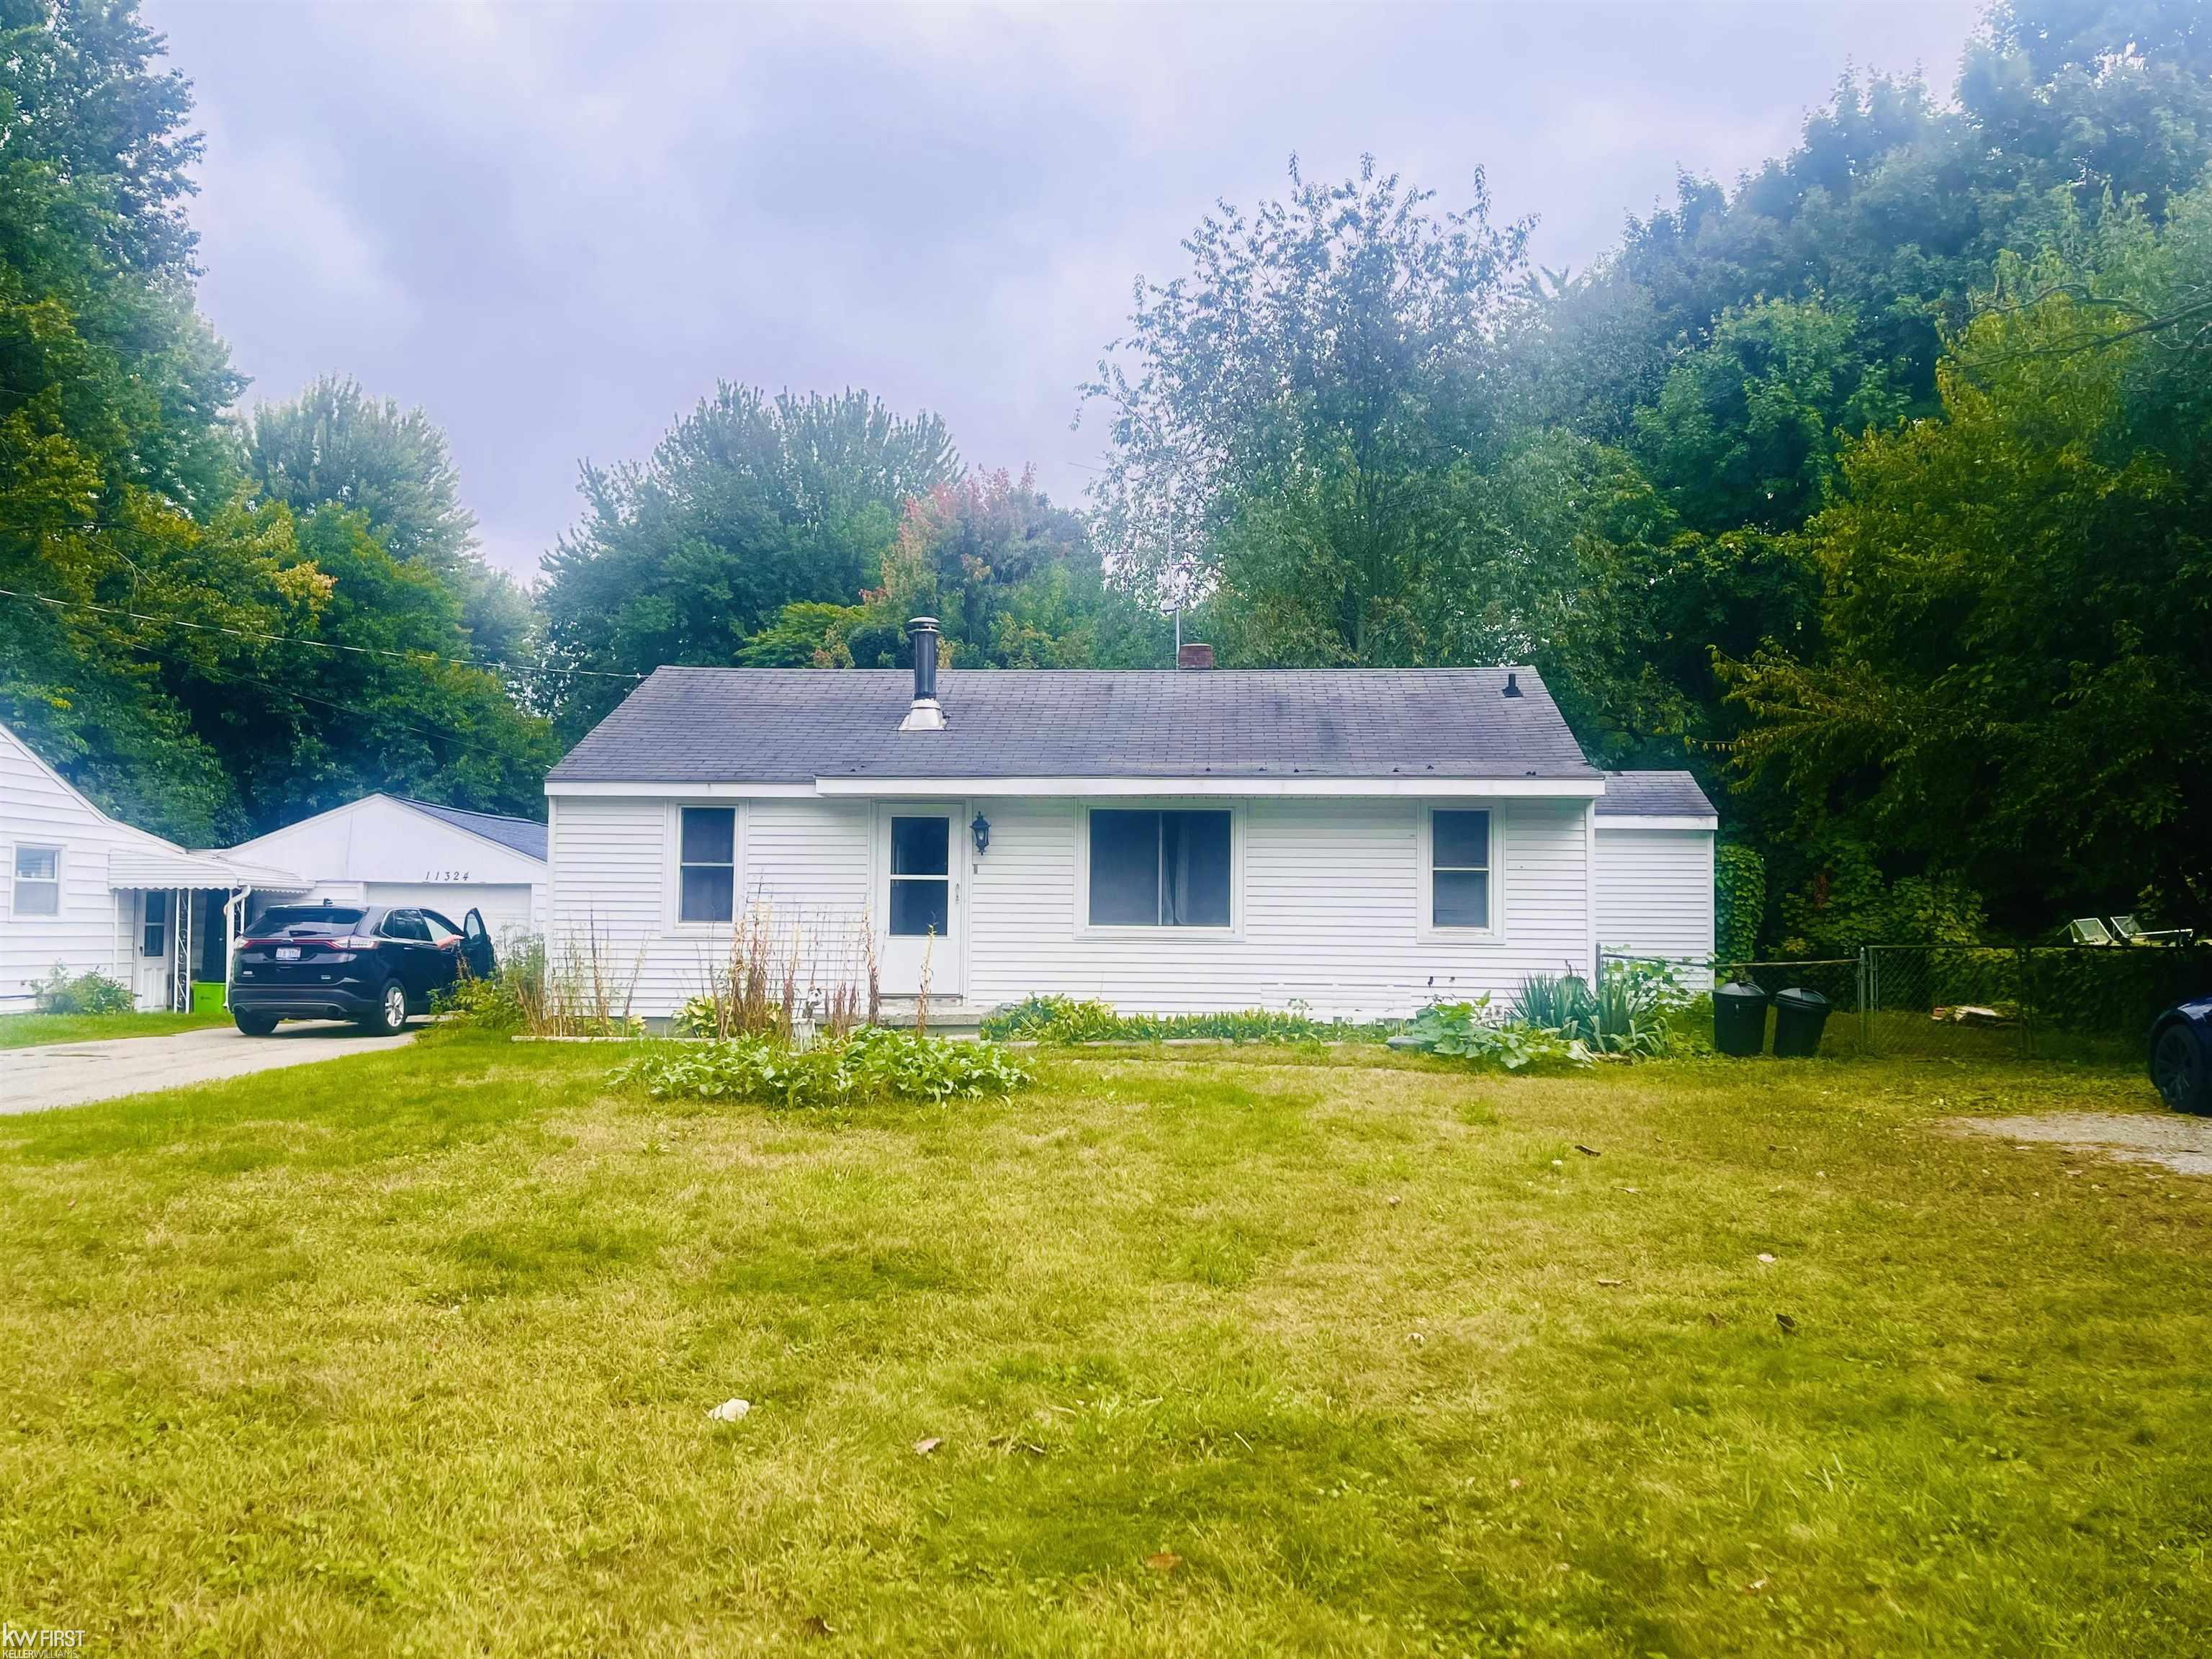 Great starter home waiting for you to put on your finishing touches. 3 Bedrooms and 1 bathroom with a nice sized fenced in back yard. Hardwood floors throughout all the bedrooms. Clio area schools. Great location, close to all shopping, dining, and entertainment!